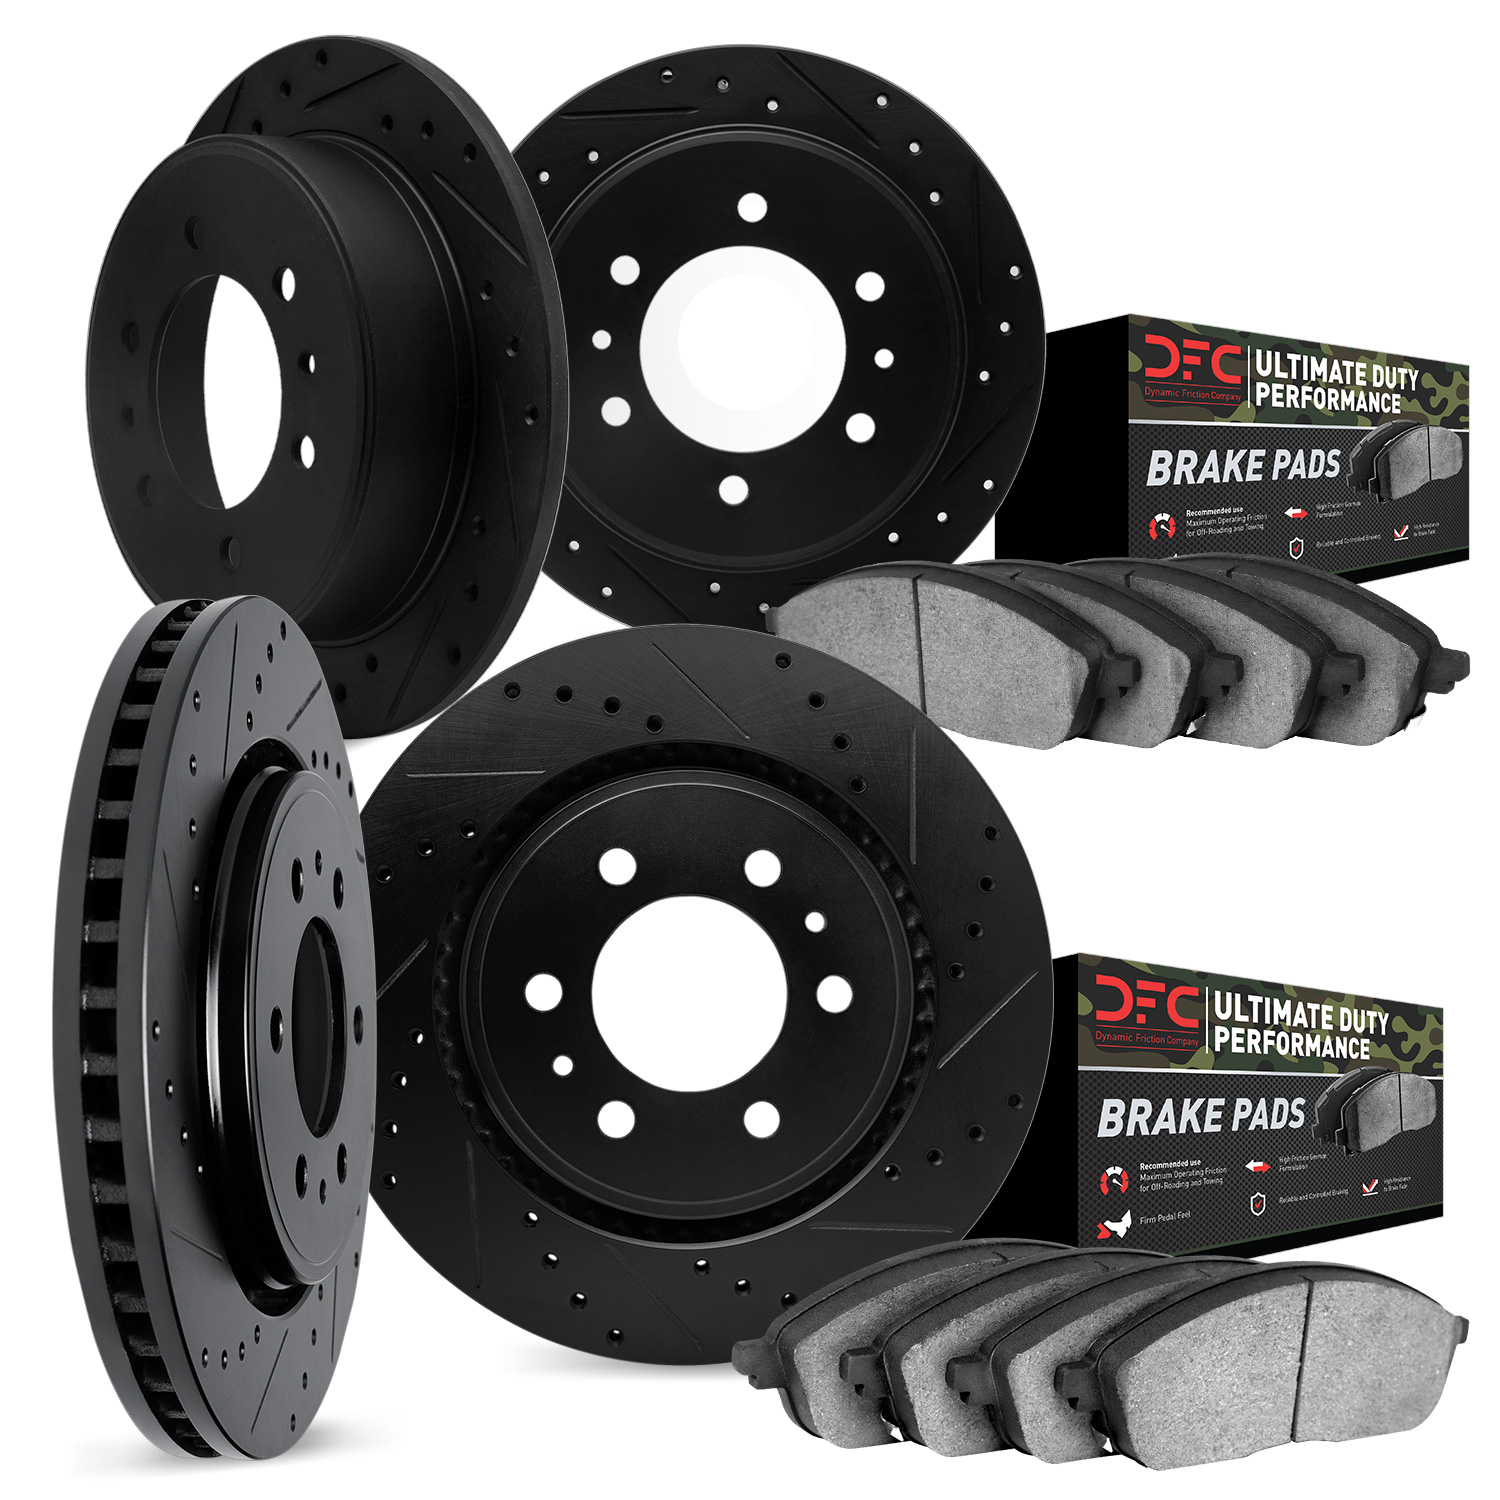 8404-67002 Drilled/Slotted Brake Rotors with Ultimate-Duty Brake Pads Kit [Black], 2005-2007 Infiniti/Nissan, Position: Front an